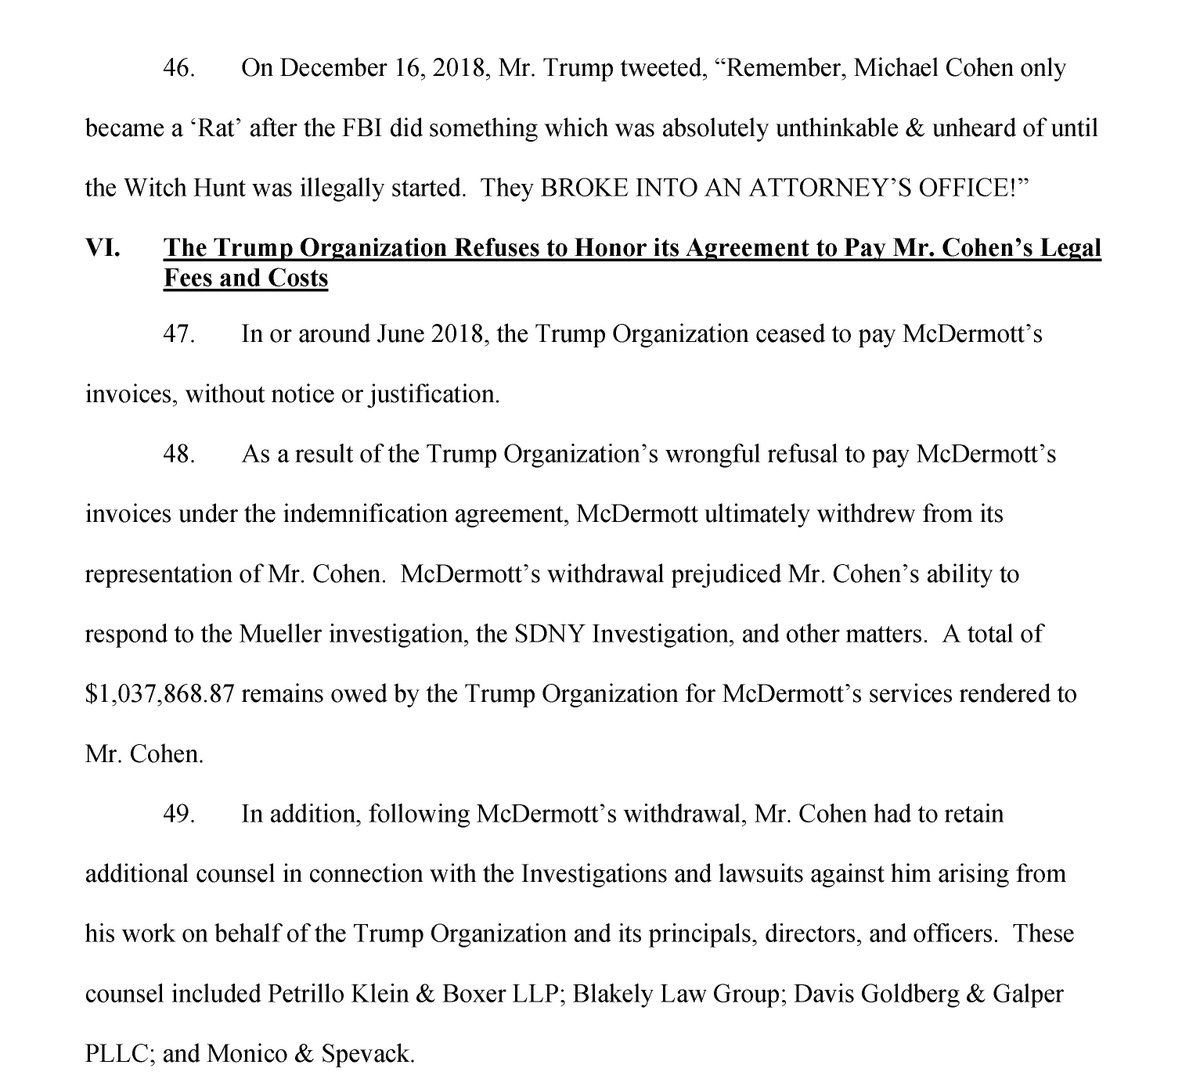 Campaign along with Trump Org also initially paid to defend Michael Cohen--at least until Cohen hinted he might turn against Mr. Trump, then the money to pay Cohen lawyer cut off.